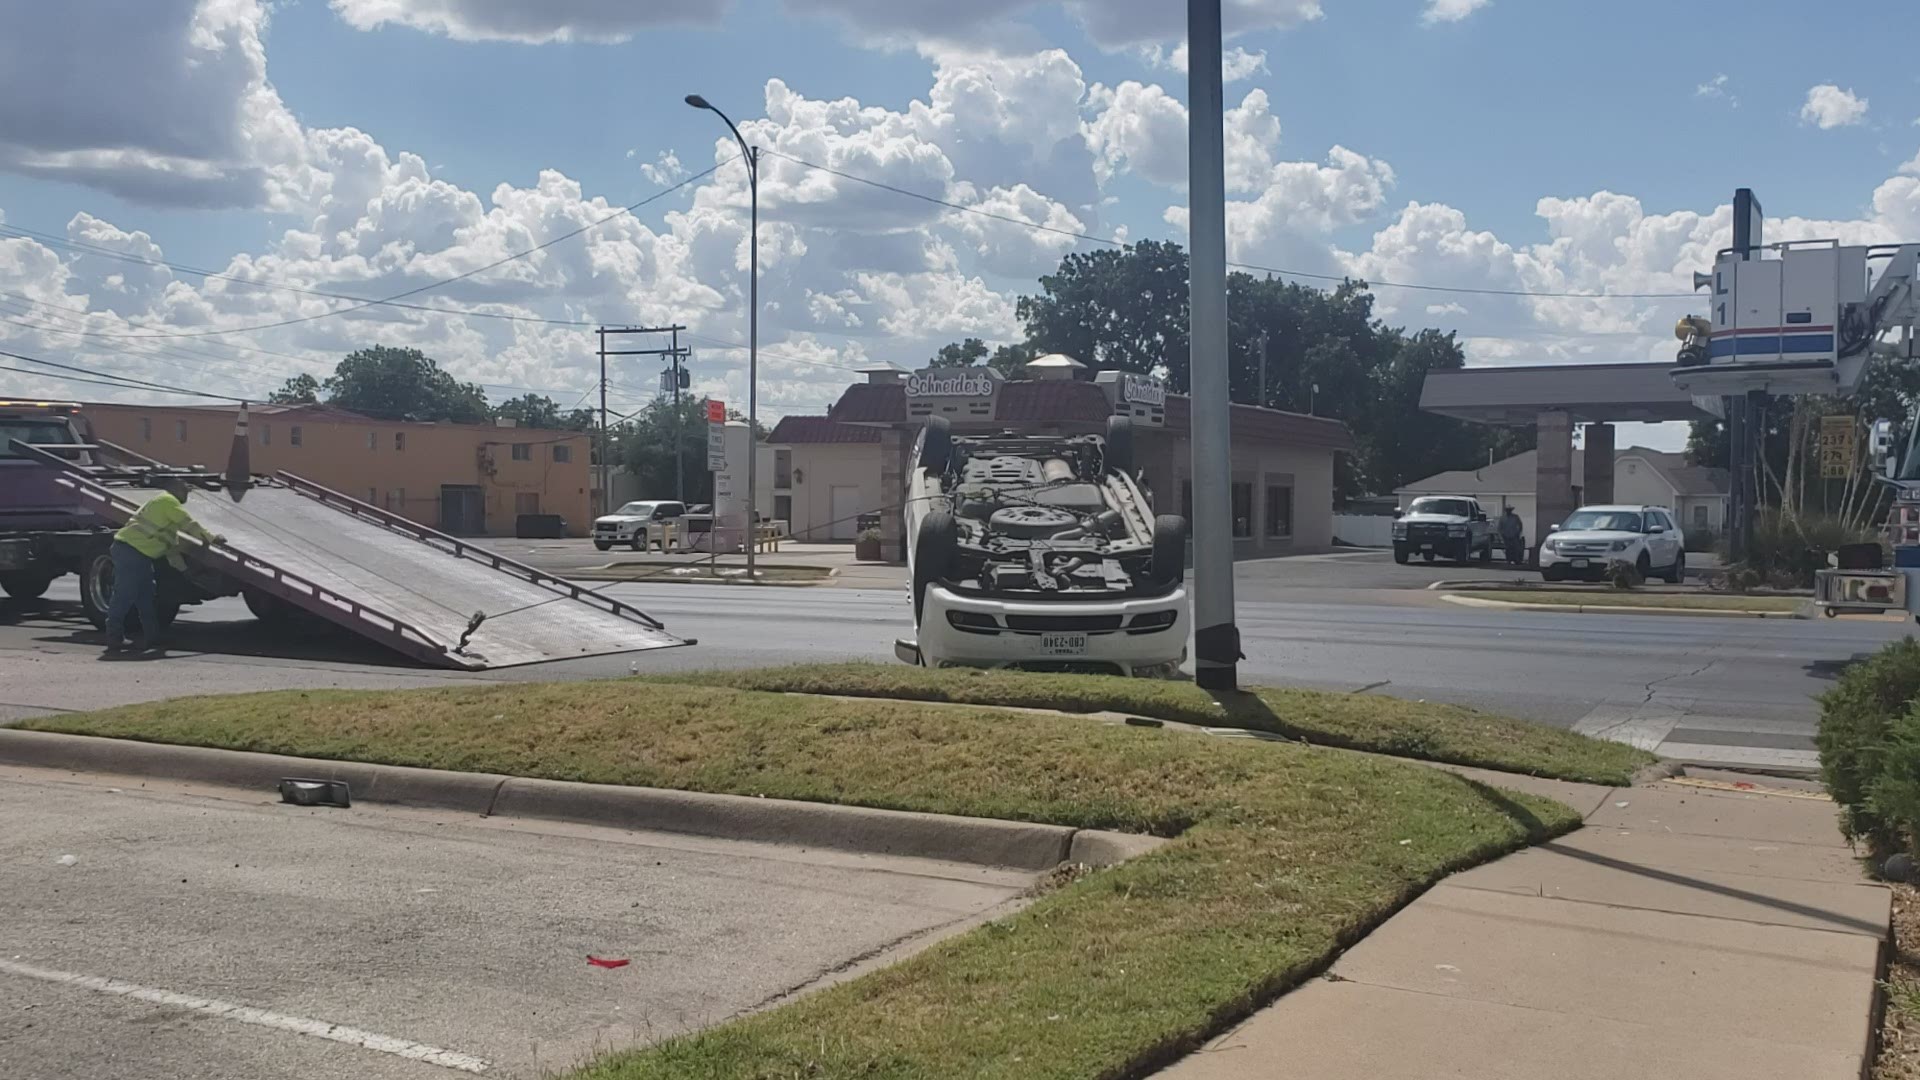 Two vans collided at the intersection of West Harris Avenue and South Abe Street, causing one van to roll over.